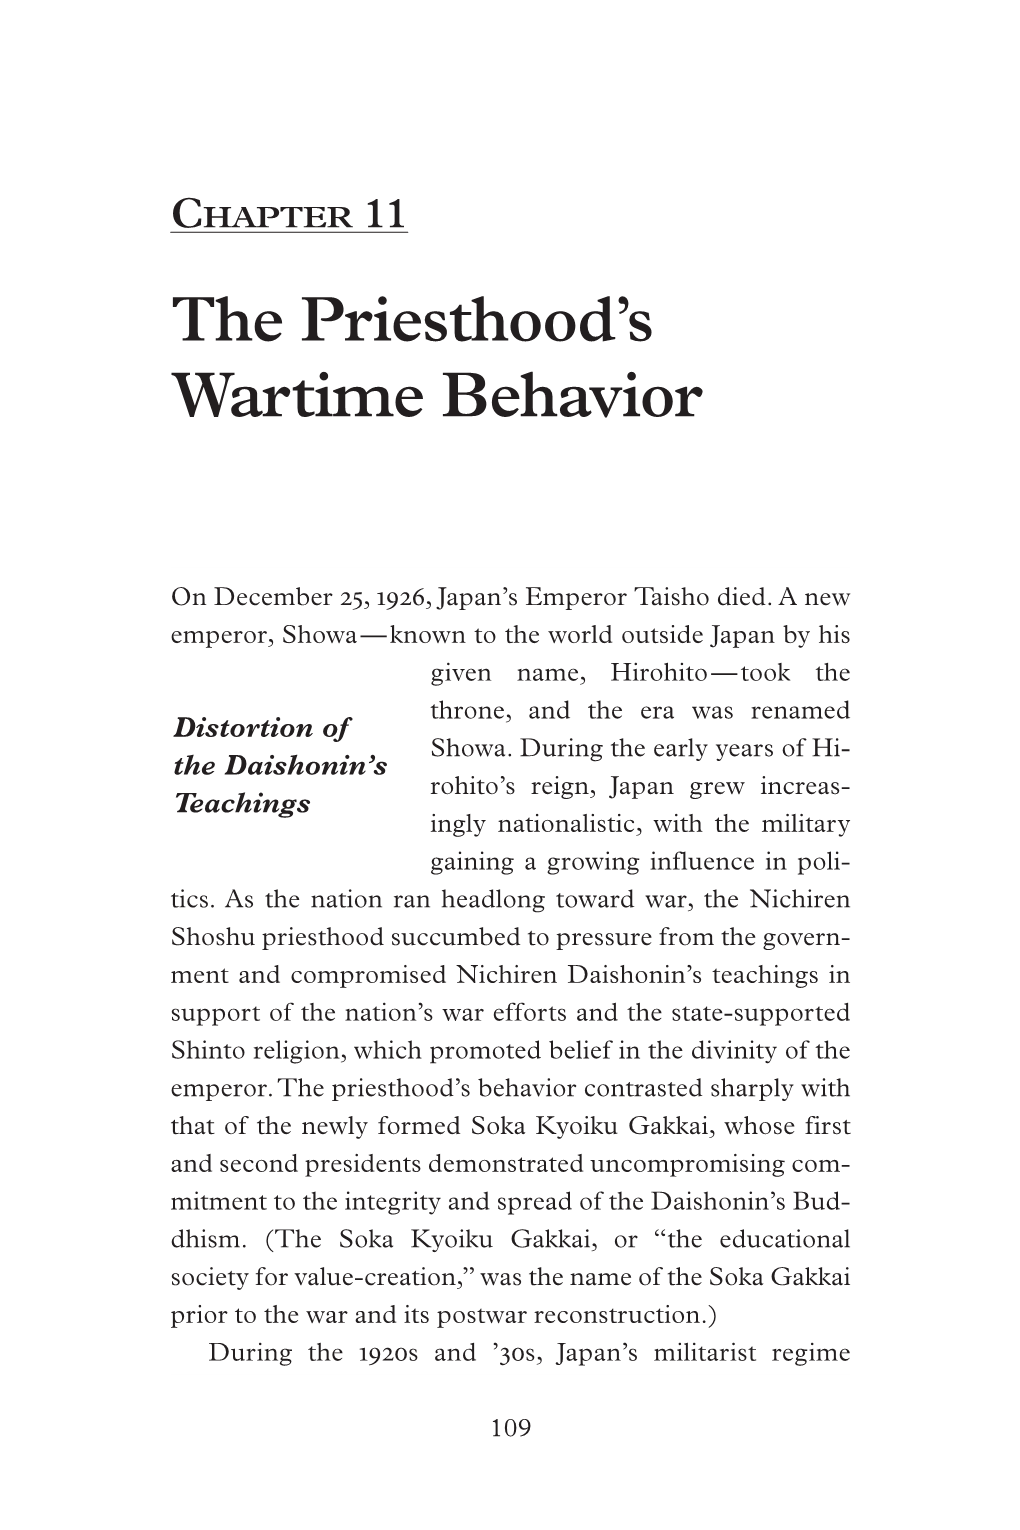 Chapter 11: the Priesthood's Wartime Behavior